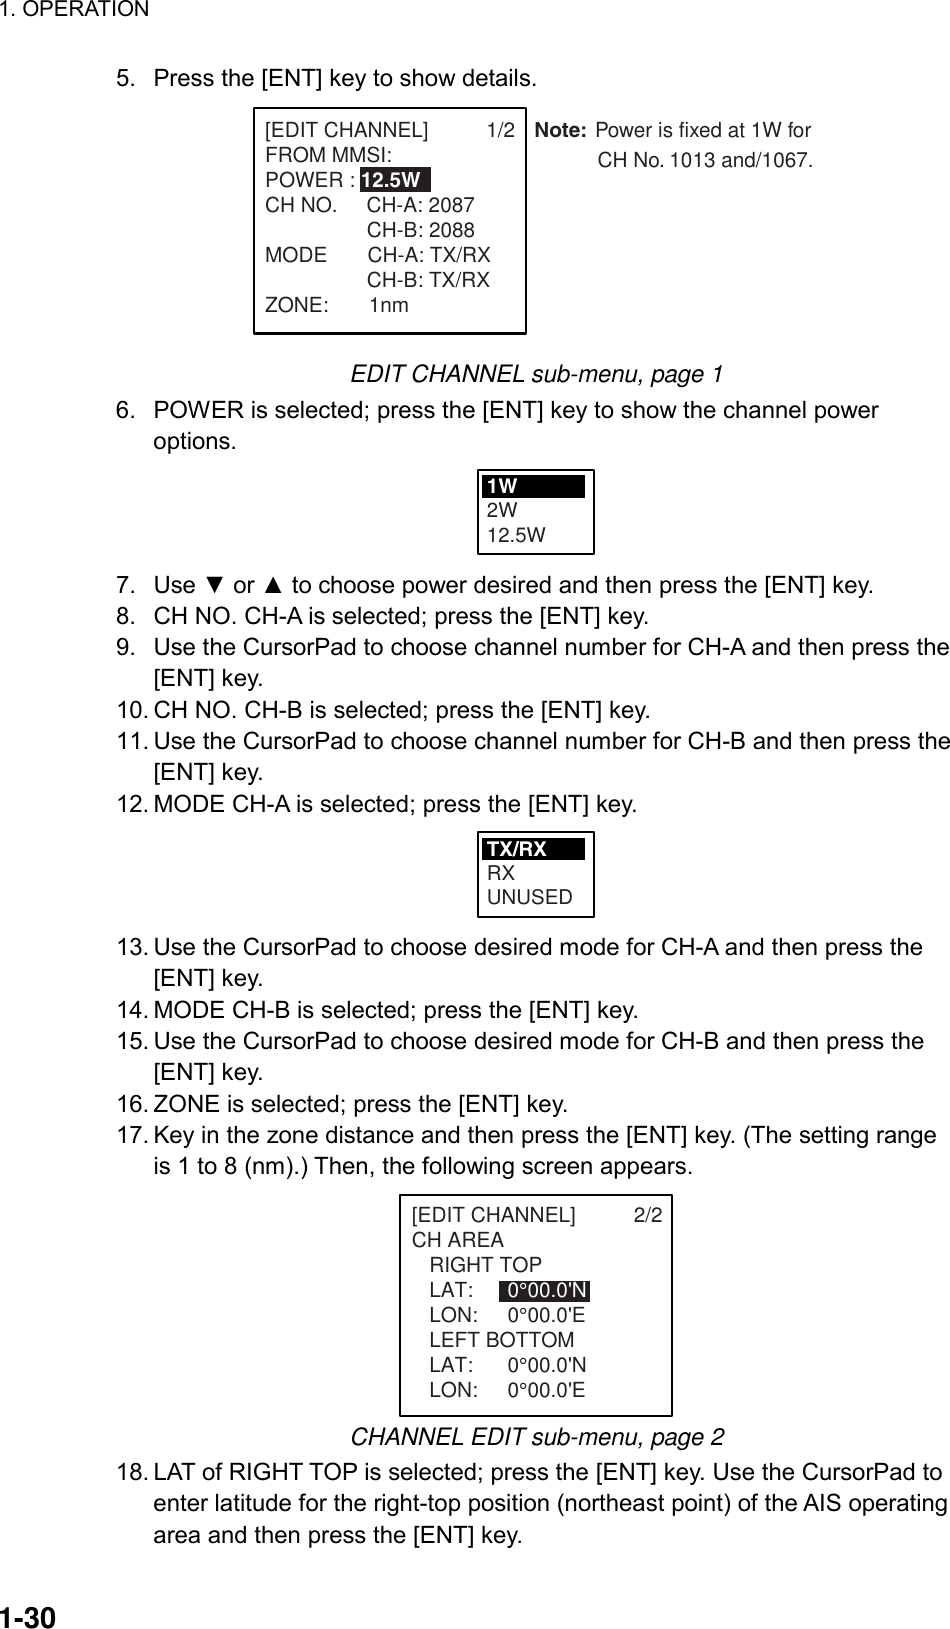 1. OPERATION  1-30 5.  Press the [ENT] key to show details. Note: Power is fixed at 1W for            CH No. 1013 and/1067.[EDIT CHANNEL]          1/2FROM MMSI:POWER : 12.5WCH NO.     CH-A: 2087 CH-B: 2088MODE       CH-A: TX/RX CH-B: TX/RXZONE:       1nm  EDIT CHANNEL sub-menu, page 1 6.  POWER is selected; press the [ENT] key to show the channel power options. 1W2W12.5W 7. Use ▼ or ▲ to choose power desired and then press the [ENT] key. 8.  CH NO. CH-A is selected; press the [ENT] key. 9.  Use the CursorPad to choose channel number for CH-A and then press the [ENT] key.   10. CH NO. CH-B is selected; press the [ENT] key. 11. Use the CursorPad to choose channel number for CH-B and then press the [ENT] key. 12. MODE CH-A is selected; press the [ENT] key. TX/RXRXUNUSED 13. Use the CursorPad to choose desired mode for CH-A and then press the [ENT] key. 14. MODE CH-B is selected; press the [ENT] key. 15. Use the CursorPad to choose desired mode for CH-B and then press the [ENT] key. 16. ZONE is selected; press the [ENT] key. 17. Key in the zone distance and then press the [ENT] key. (The setting range is 1 to 8 (nm).) Then, the following screen appears. [EDIT CHANNEL]          2/2CH AREA   RIGHT TOP   LAT:  0°00.0&apos;N   LON: 0°00.0&apos;E   LEFT BOTTOM   LAT:  0°00.0&apos;N   LON: 0°00.0&apos;E CHANNEL EDIT sub-menu, page 2 18. LAT of RIGHT TOP is selected; press the [ENT] key. Use the CursorPad to enter latitude for the right-top position (northeast point) of the AIS operating area and then press the [ENT] key. 